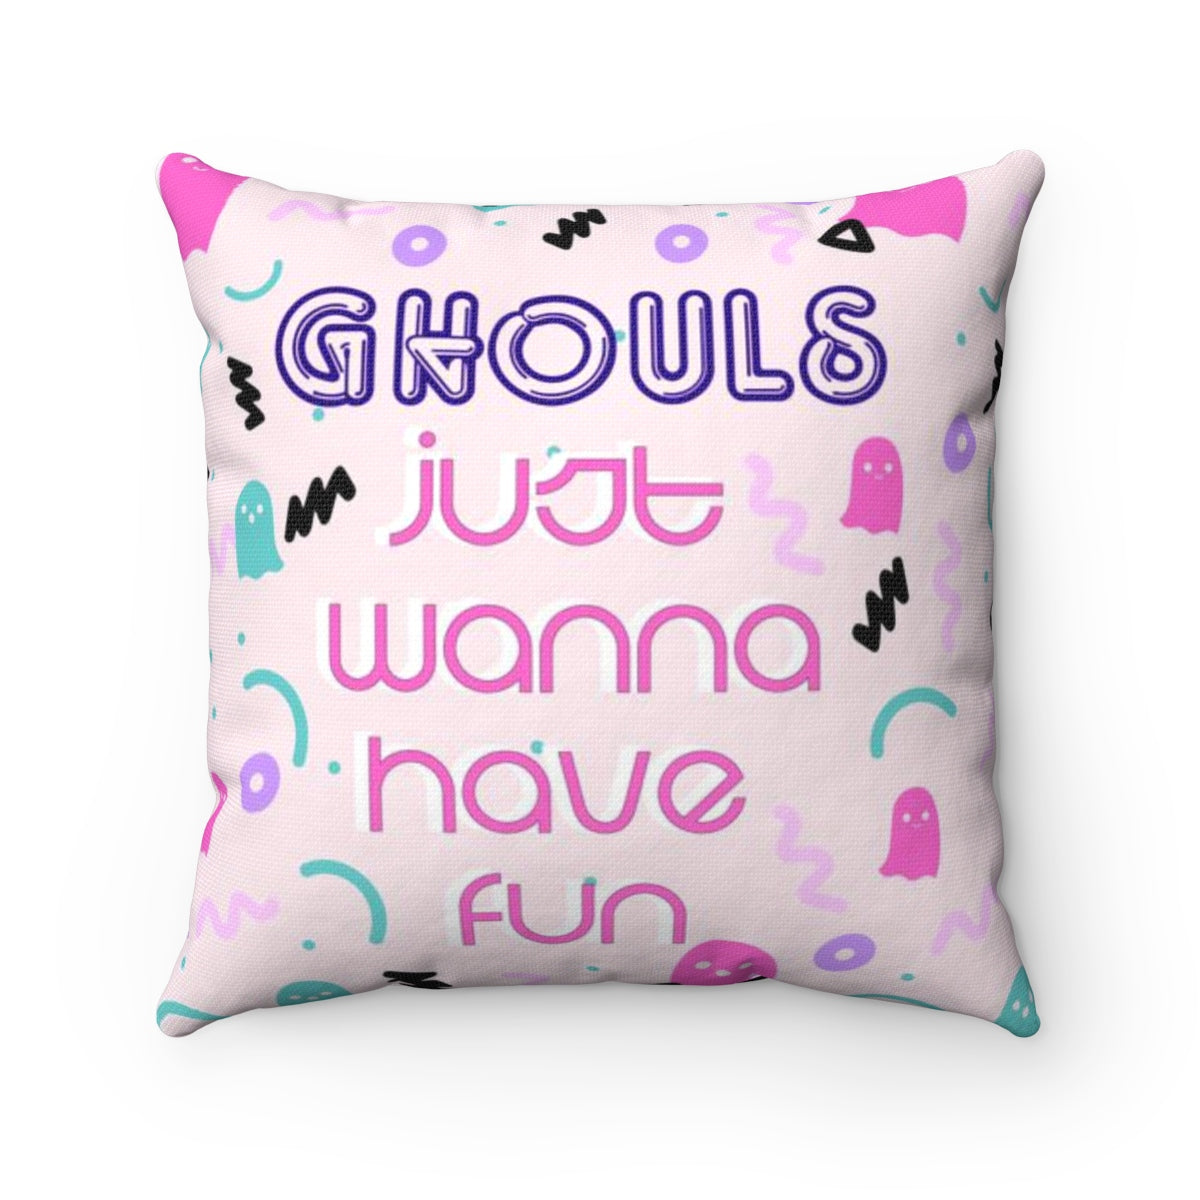 80's Inspired Ghouls Just Wanna Have Fun Halloween Throw Pillow